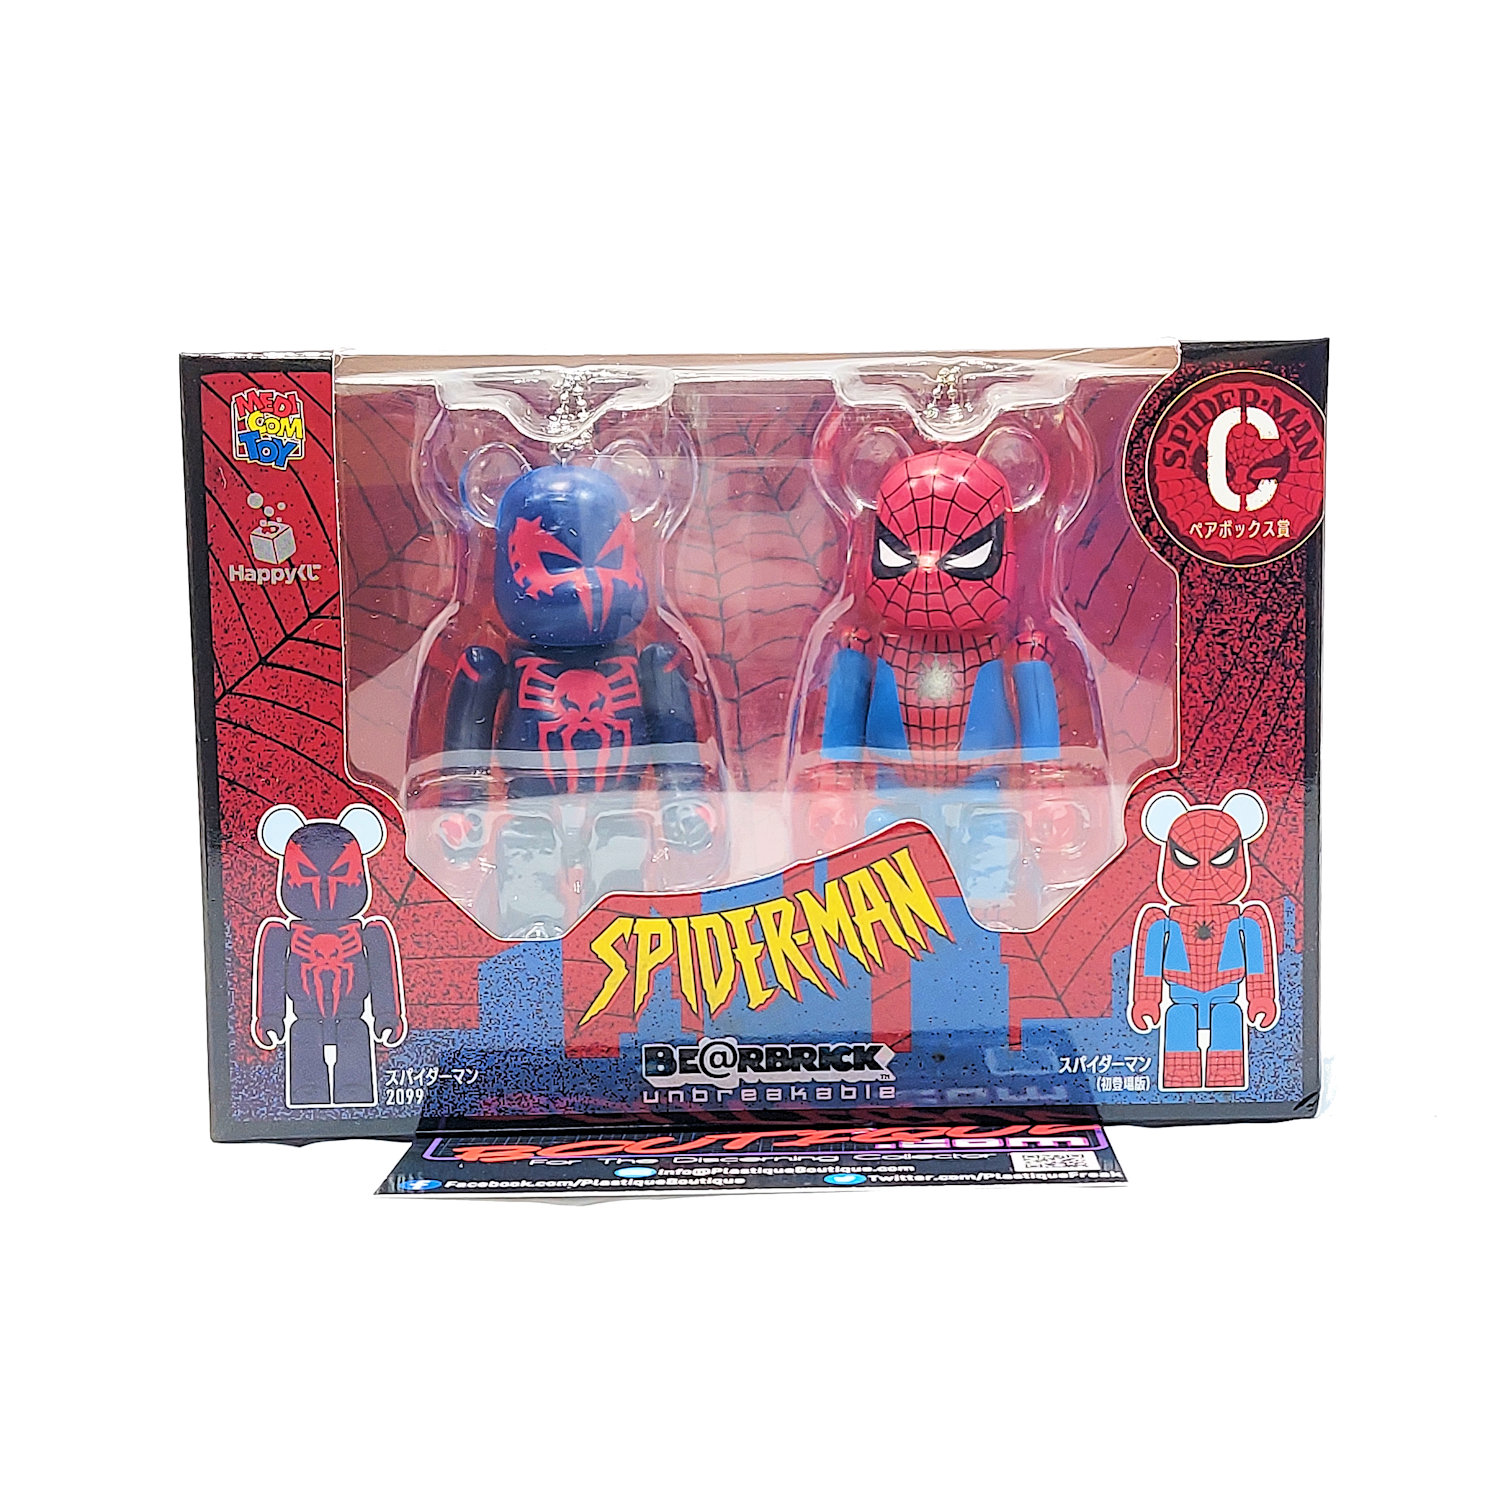 Be@rbrick Happy Kuji Spider-Man: Spider-Man 2099 & Spider-Man (1st Appearance) 2 Pack (Prize C)